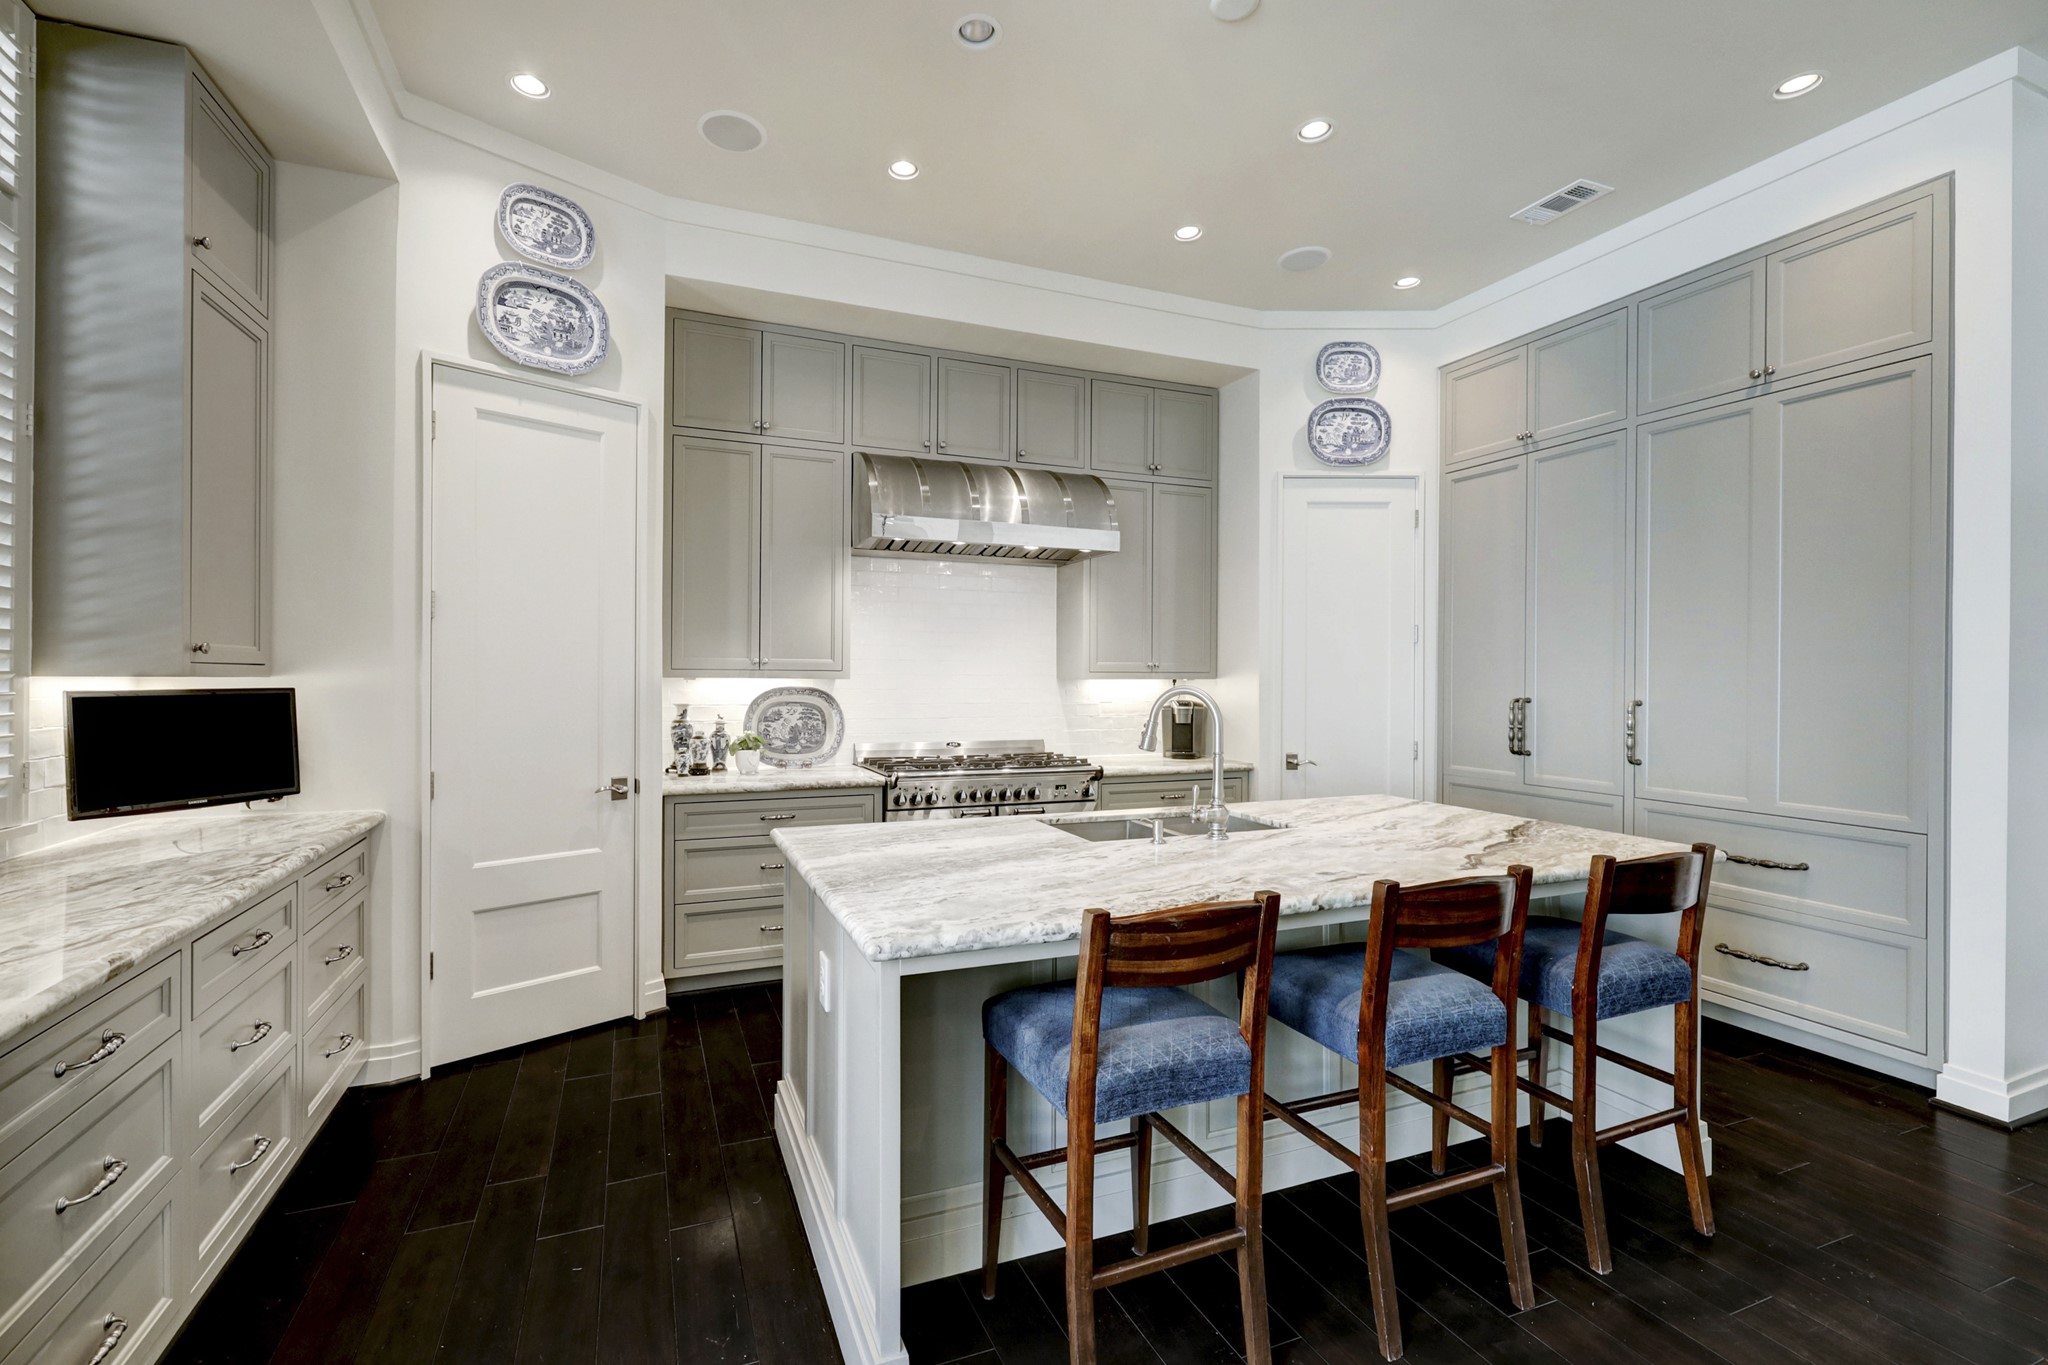 Kitchen (19x9) has beautiful cabinetry and millwork which compliments this flexible floor plan.